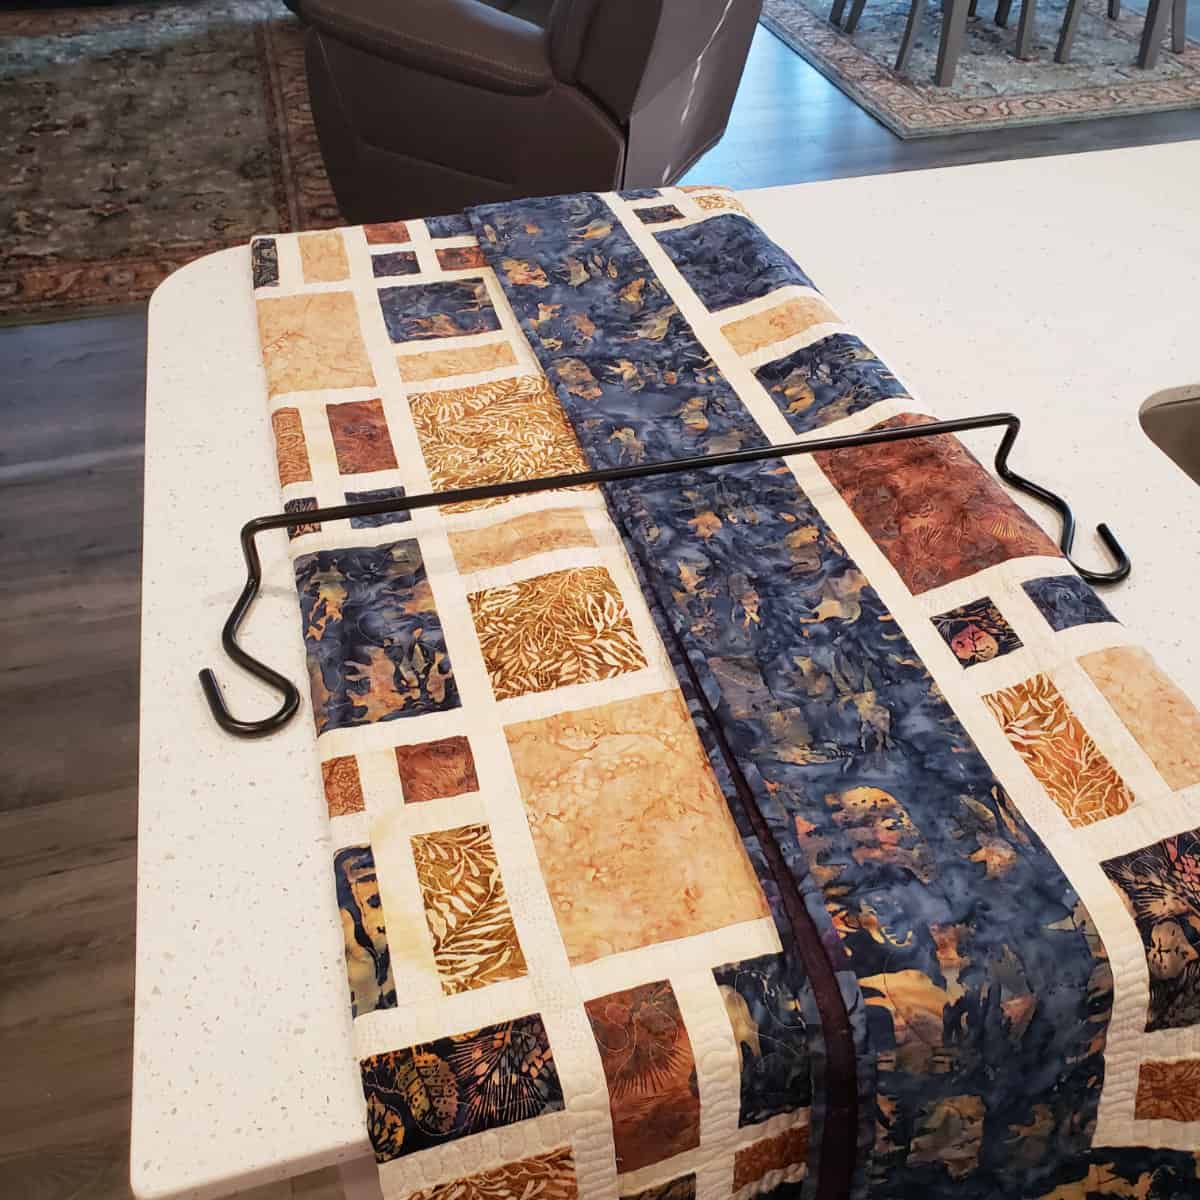 Putting the quilt on the quilt keeper bar